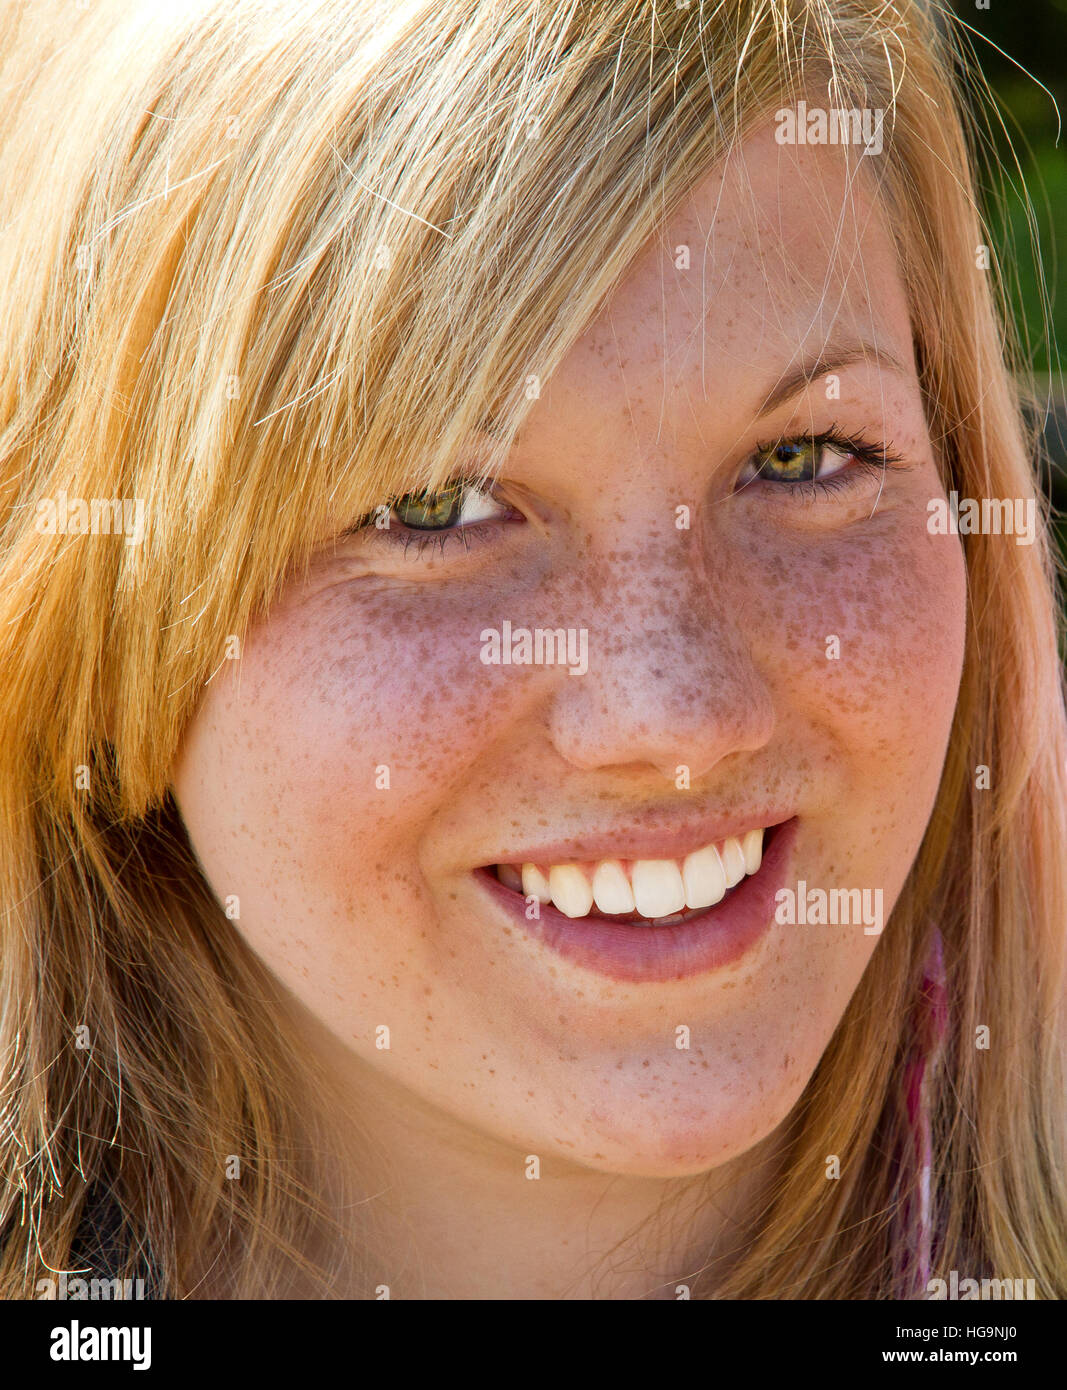 Portrait of a smiling young girl Stock Photo